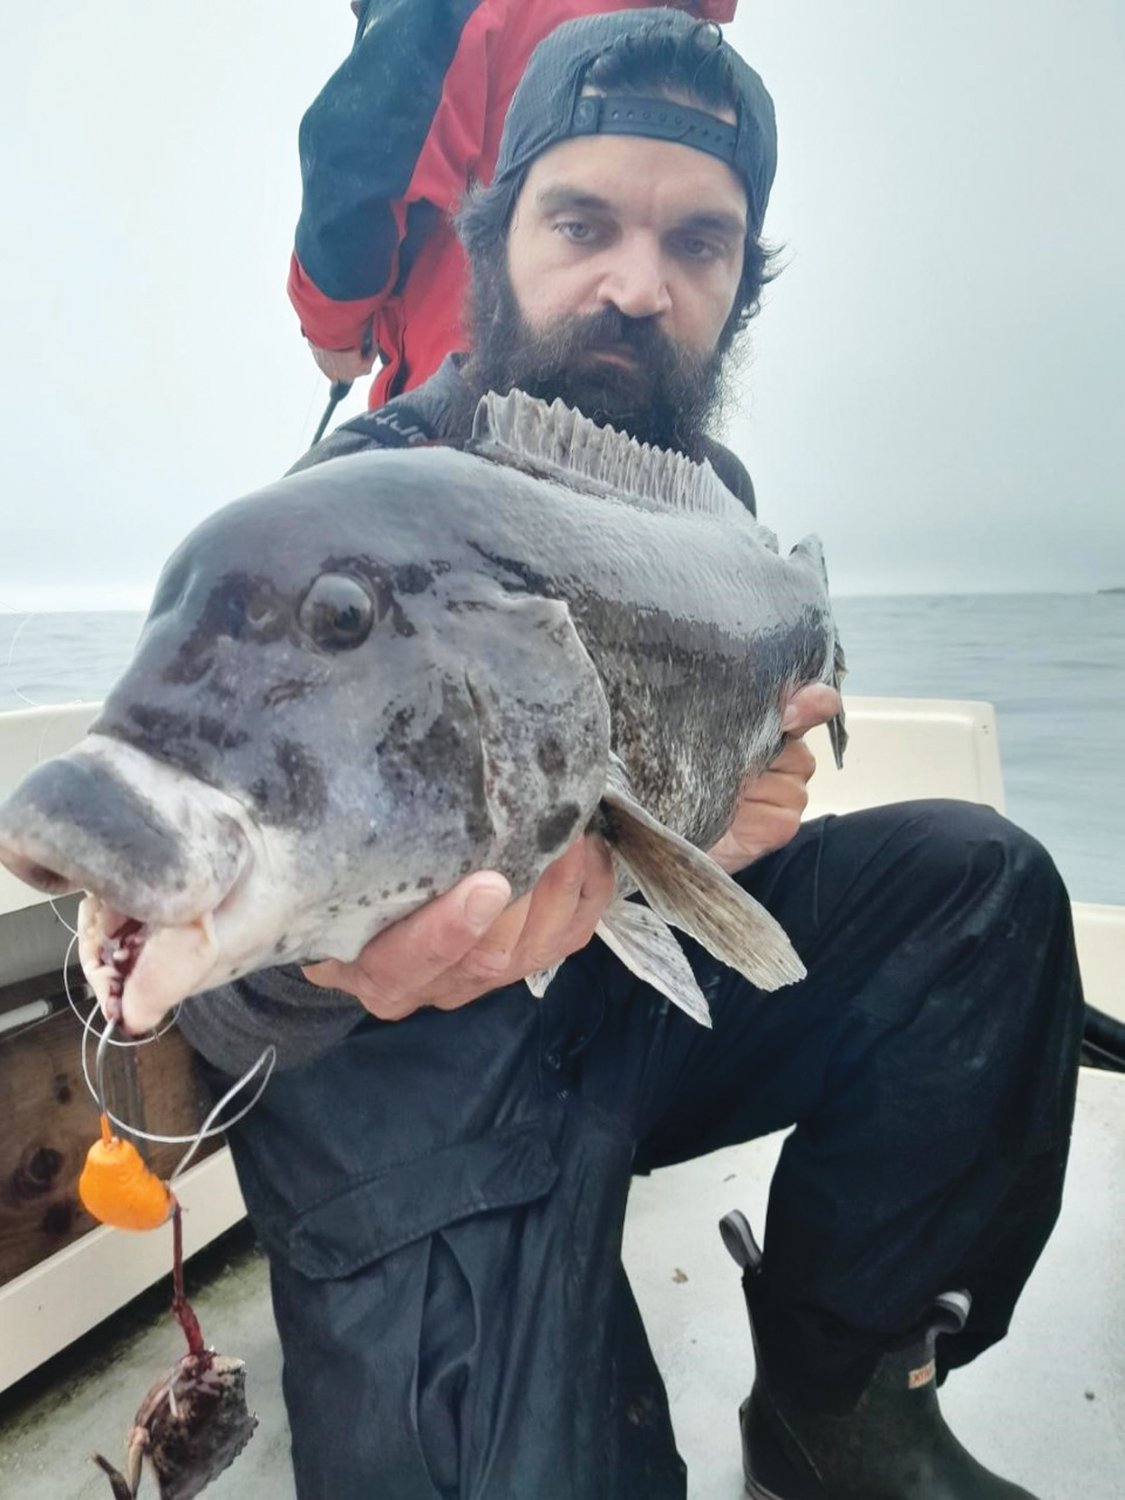 NEWPORT TAUTOG: Jigs outperform any bait rig for Jeff Sullivan.  Shown here with at 13 pound tautog caught off Newport. (Submitted photo)